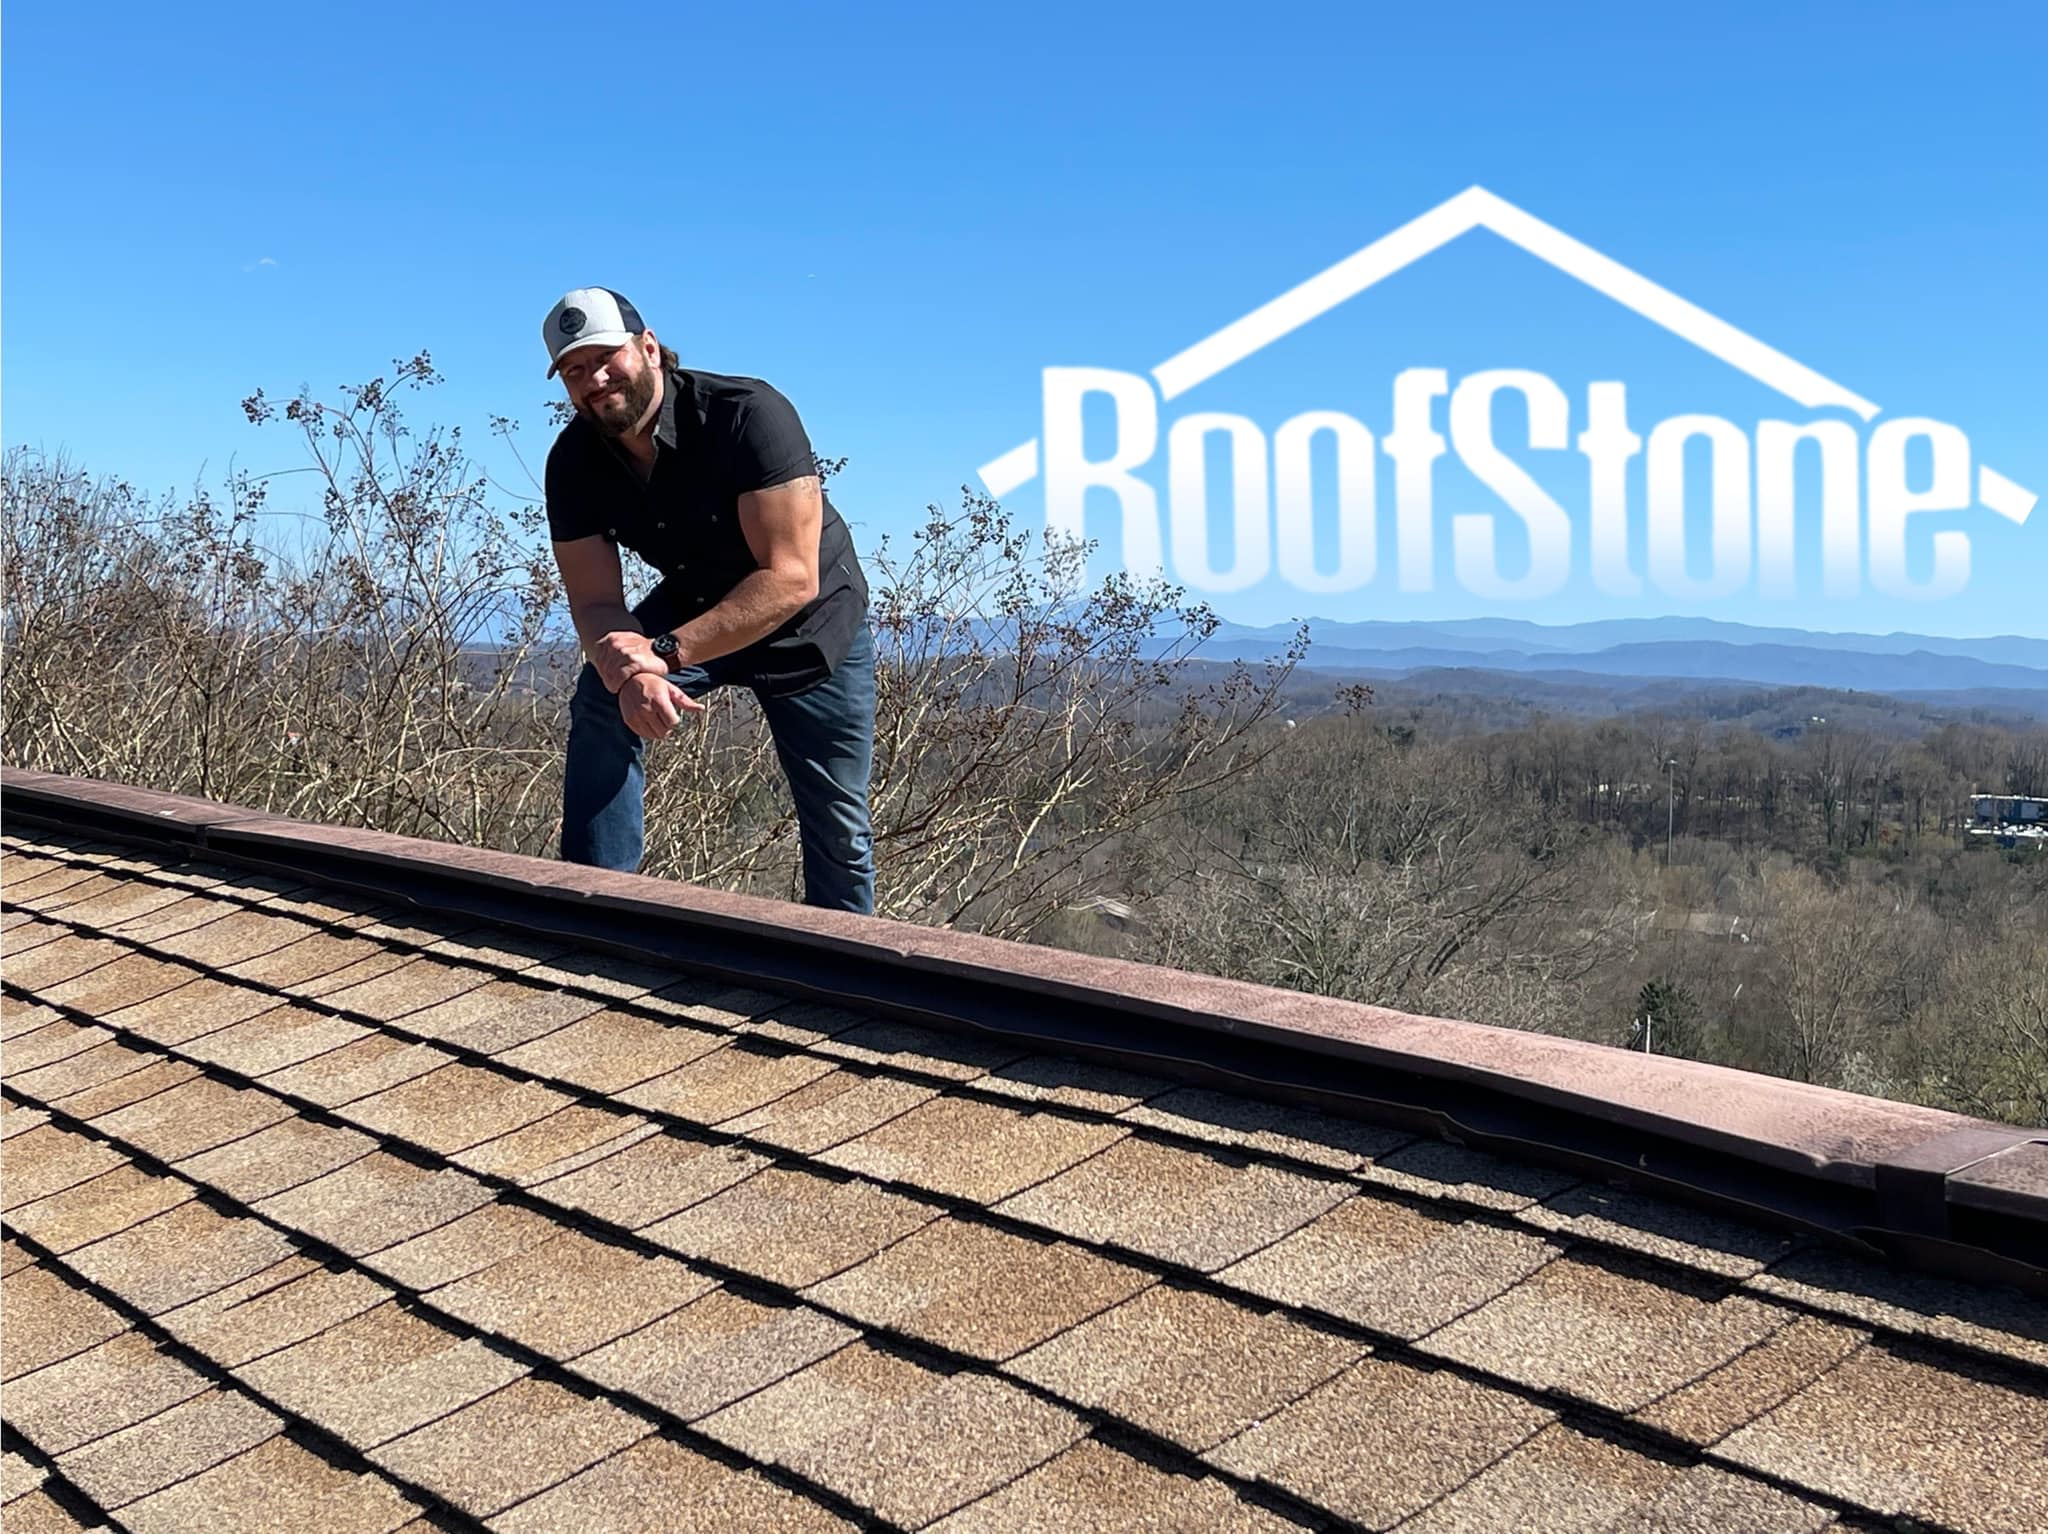 Roofstone employee with roofstone logo in the sky